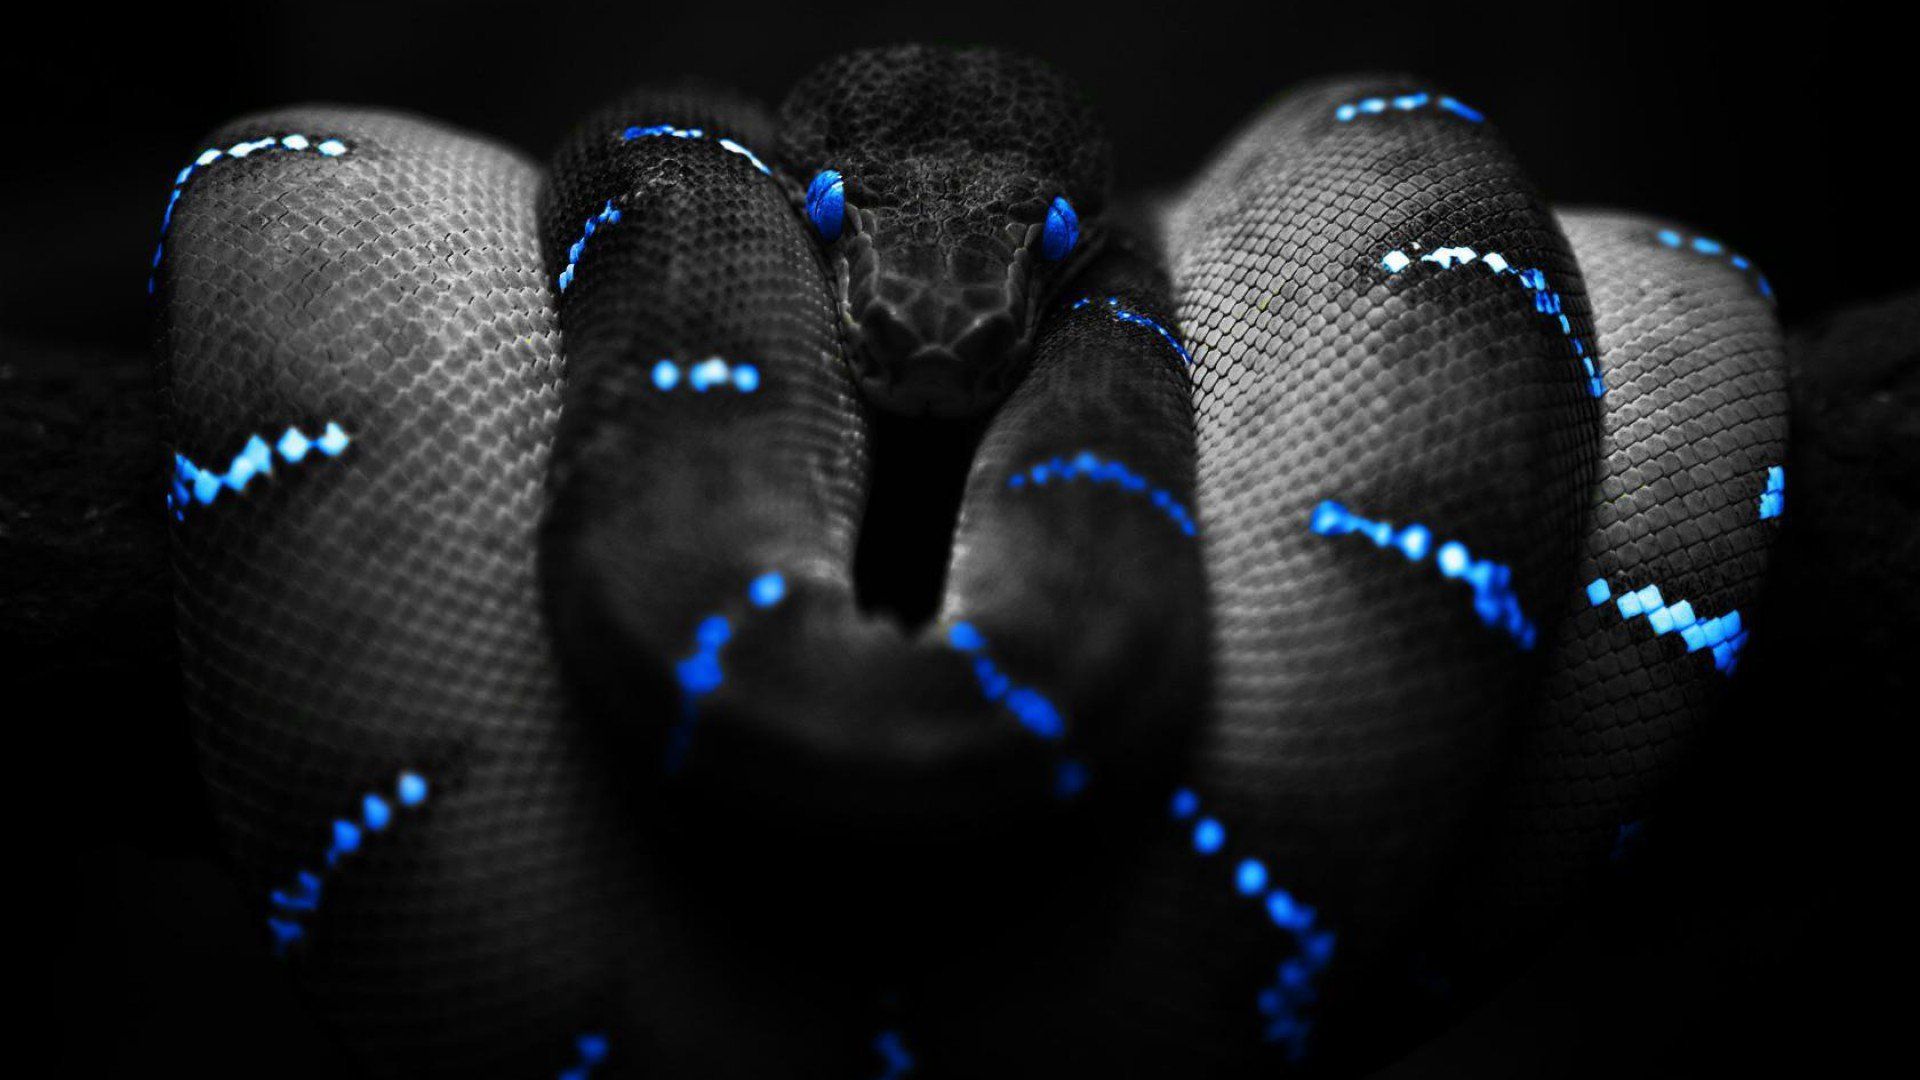 A black and blue snake with glowing eyes - Snake